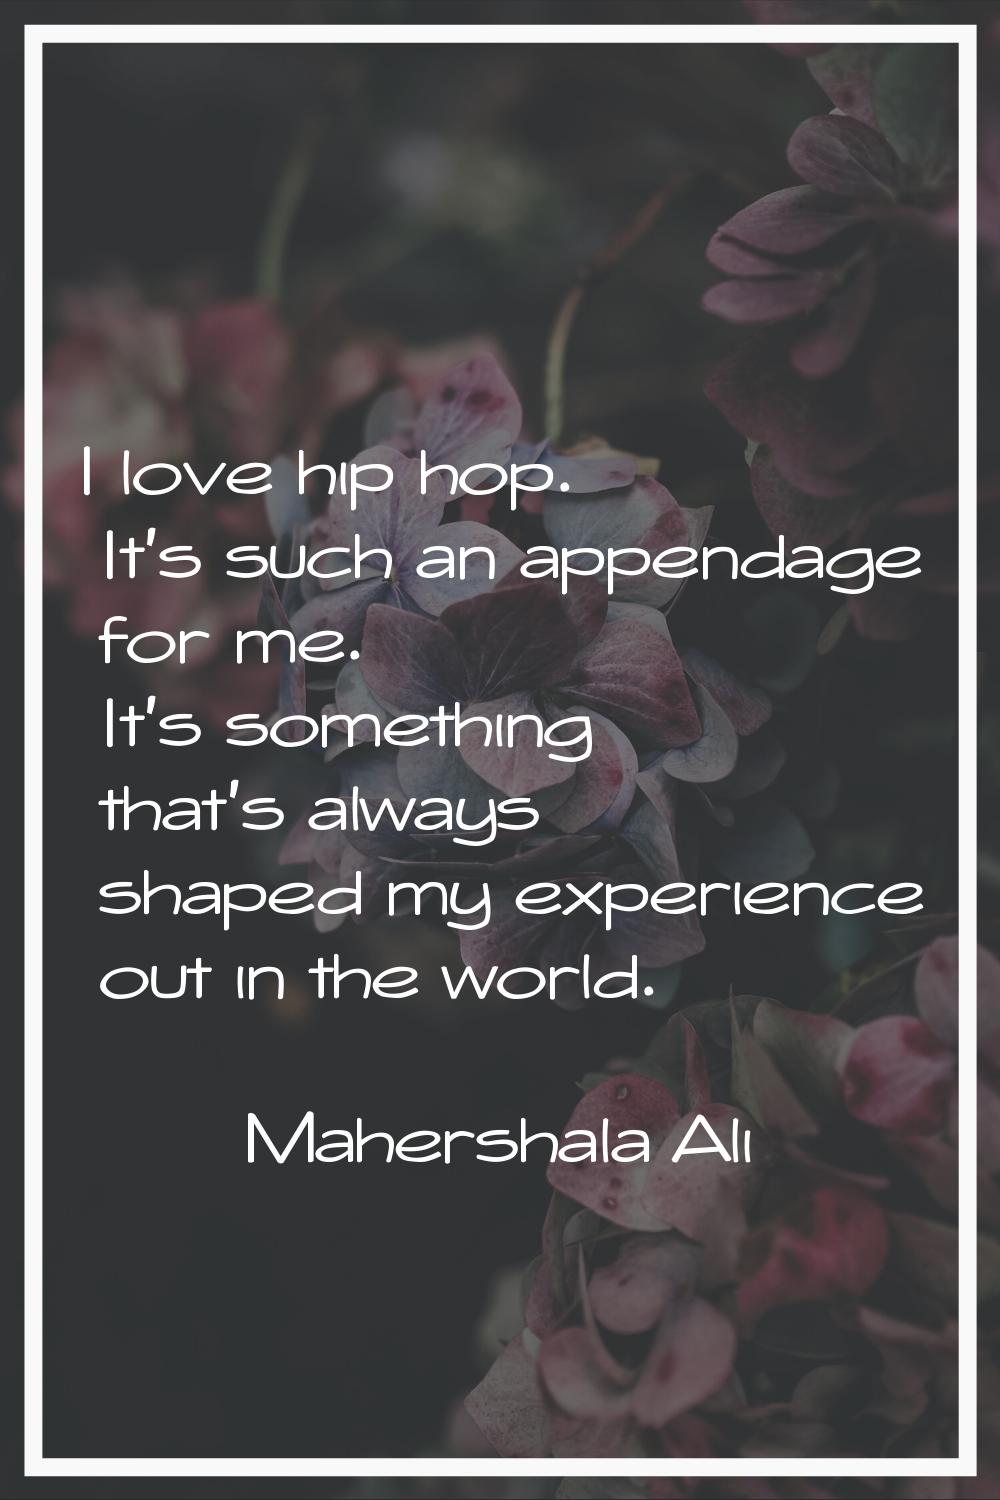 I love hip hop. It's such an appendage for me. It's something that's always shaped my experience ou